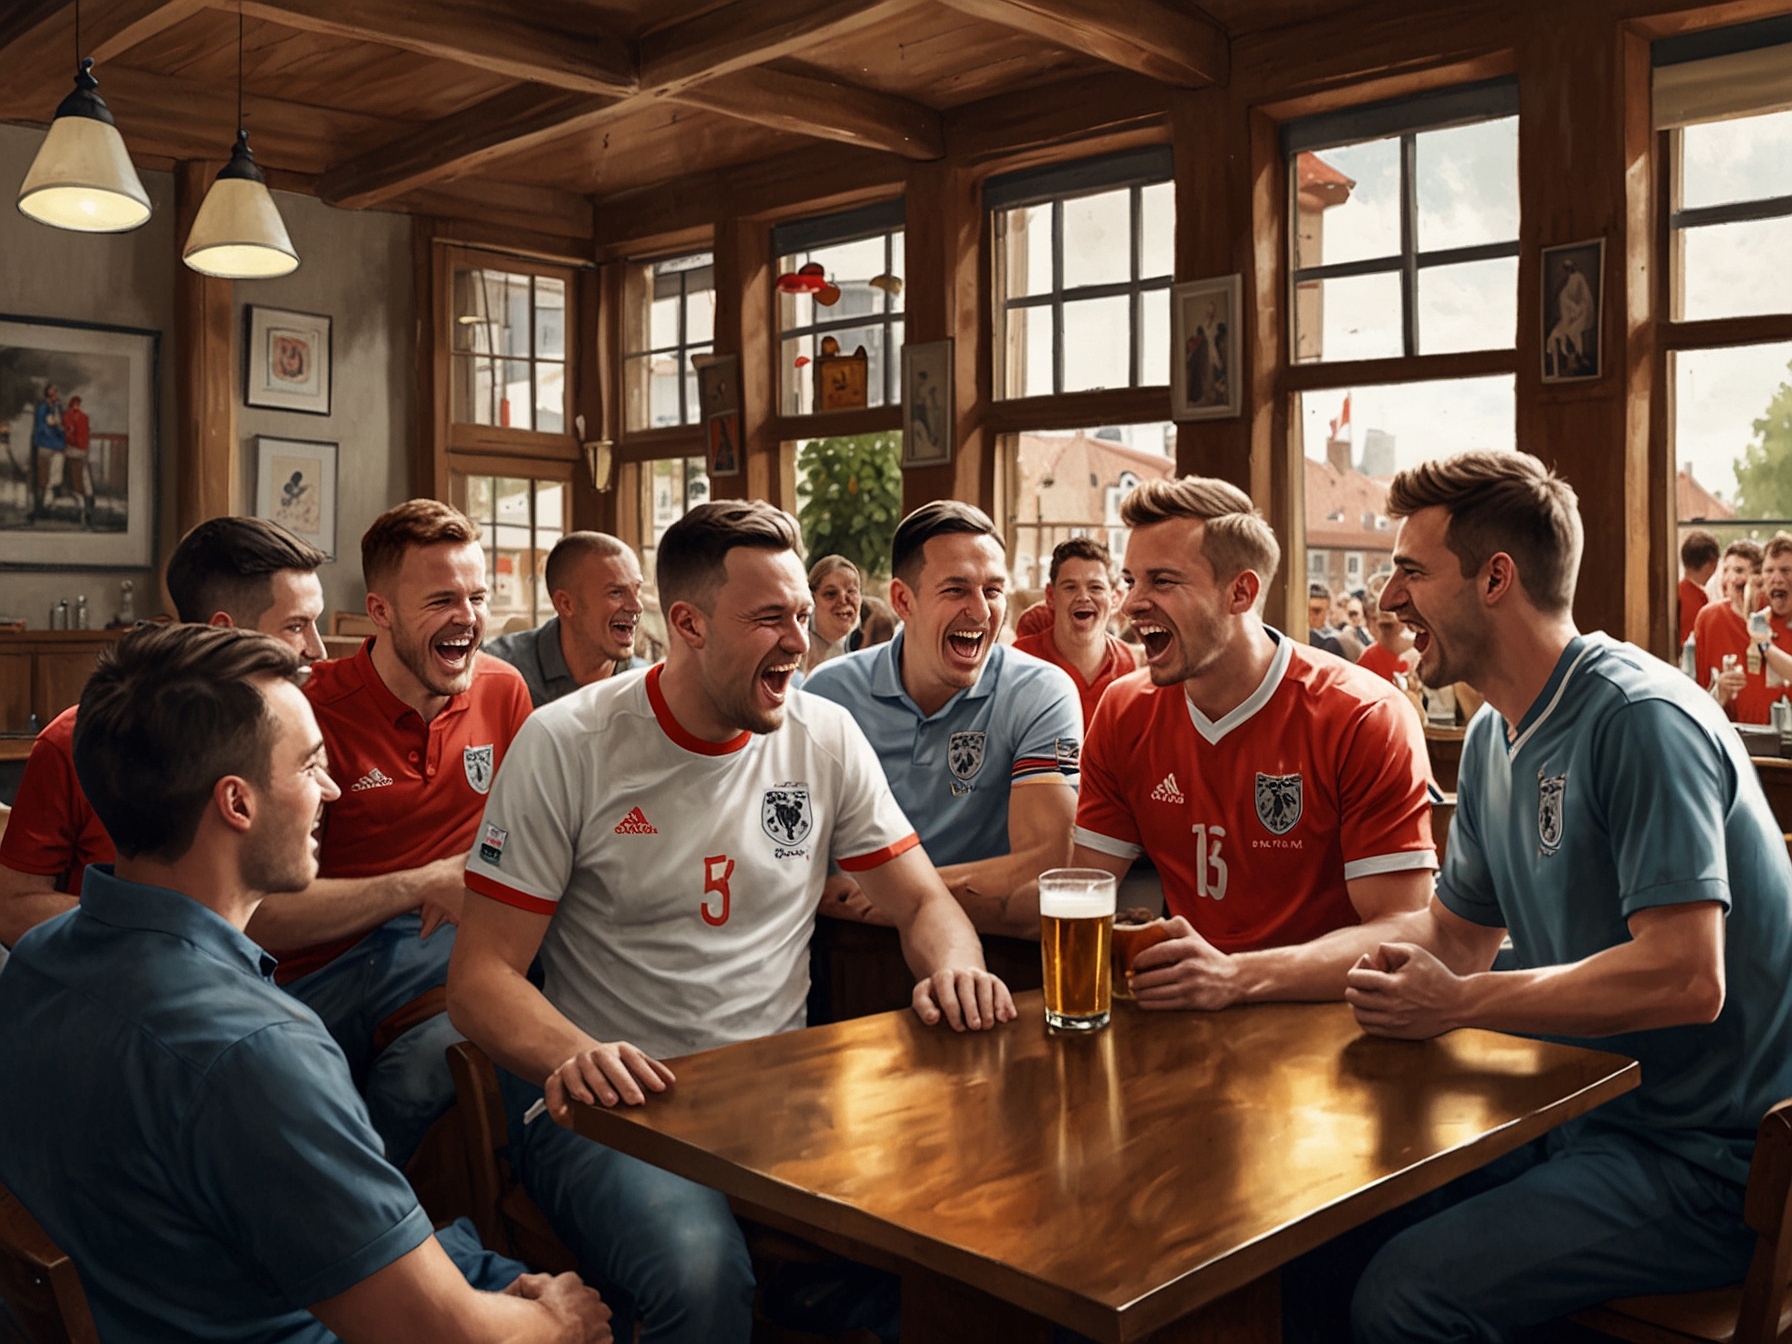 A bustling pub in Berlin filled with English fans sporting white and red jerseys, chanting and enjoying beers, as they eagerly discuss the upcoming Euros match against Slovenia.